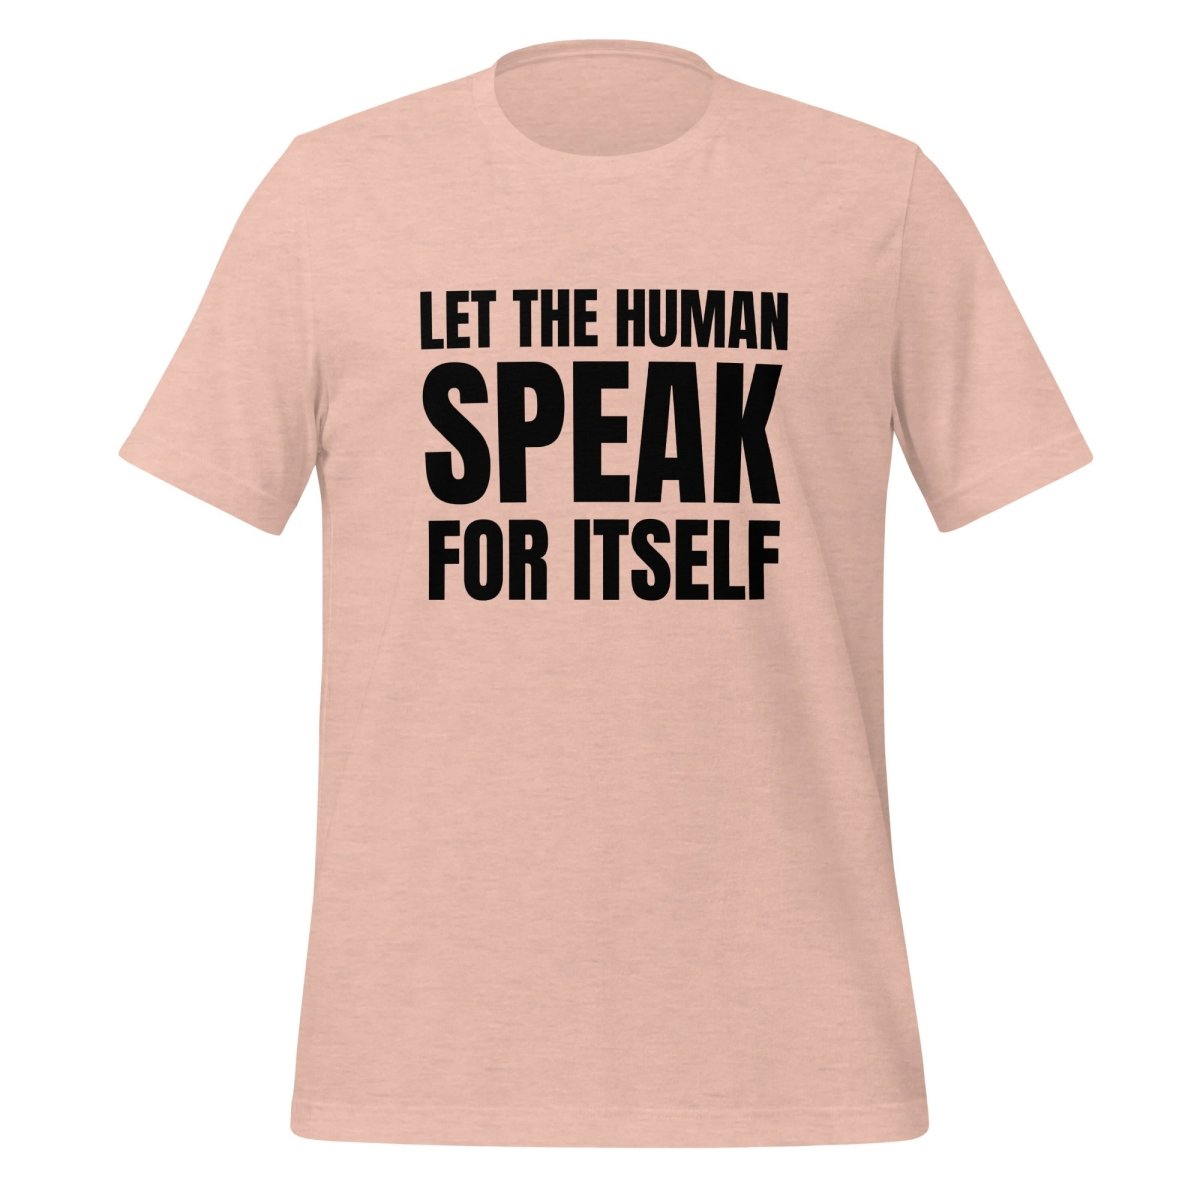 Let the Human Speak for Itself T - Shirt (unisex) - Heather Prism Peach - AI Store